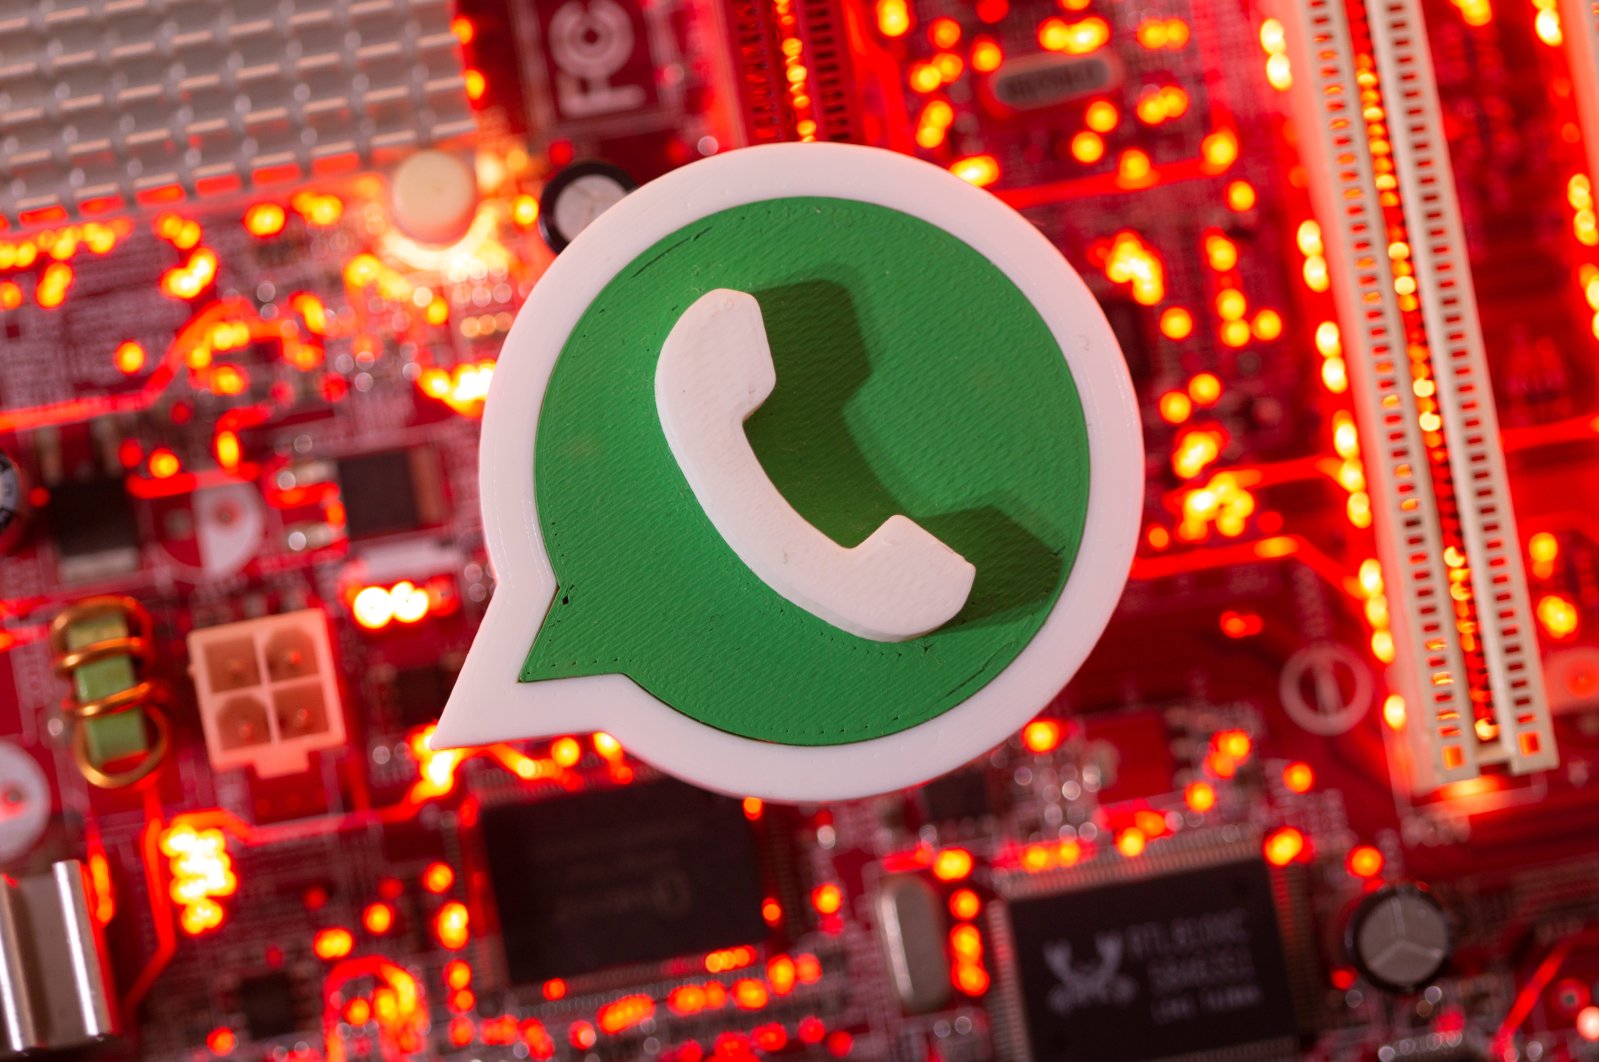 A 3D printed Whatsapp logo is placed on a computer motherboard in this illustration created on Jan. 21, 2021. (Reuters Photo)